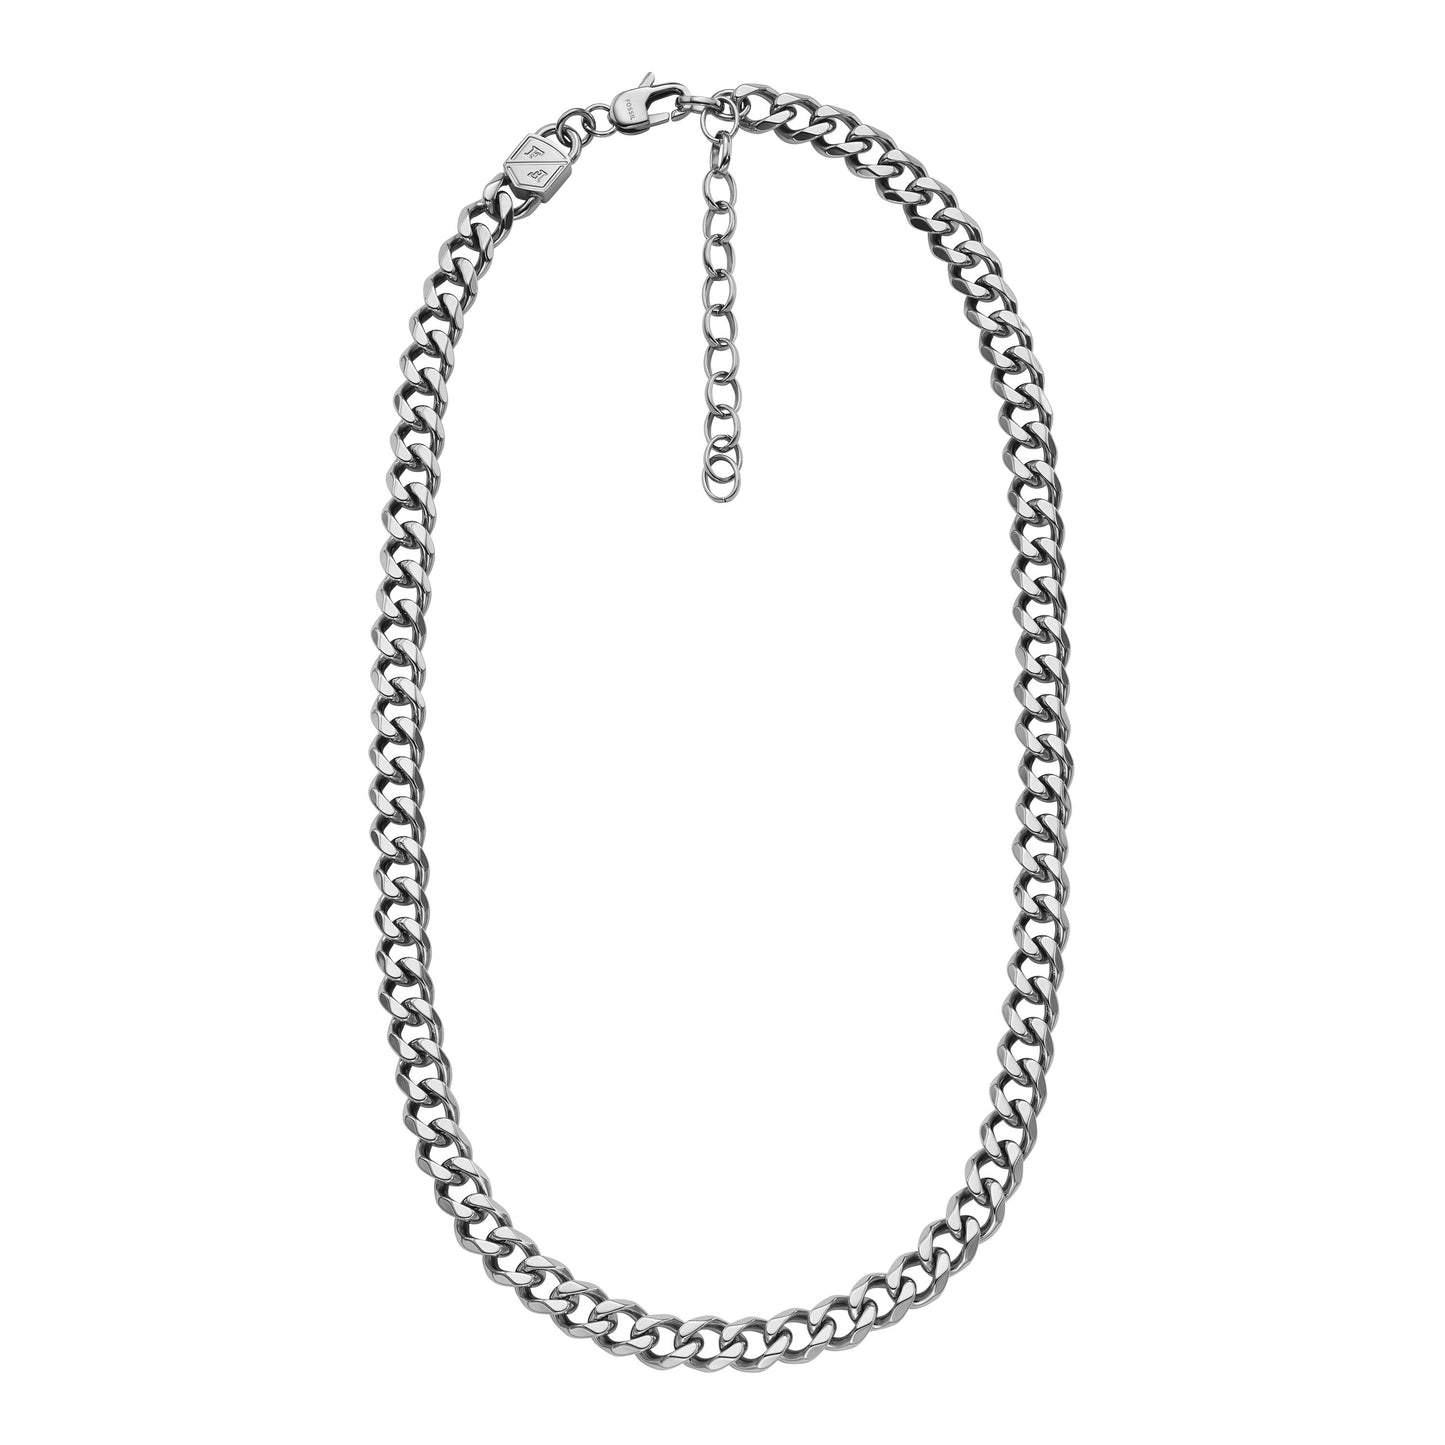 Fossil JF04412040 Men's Steel Necklace